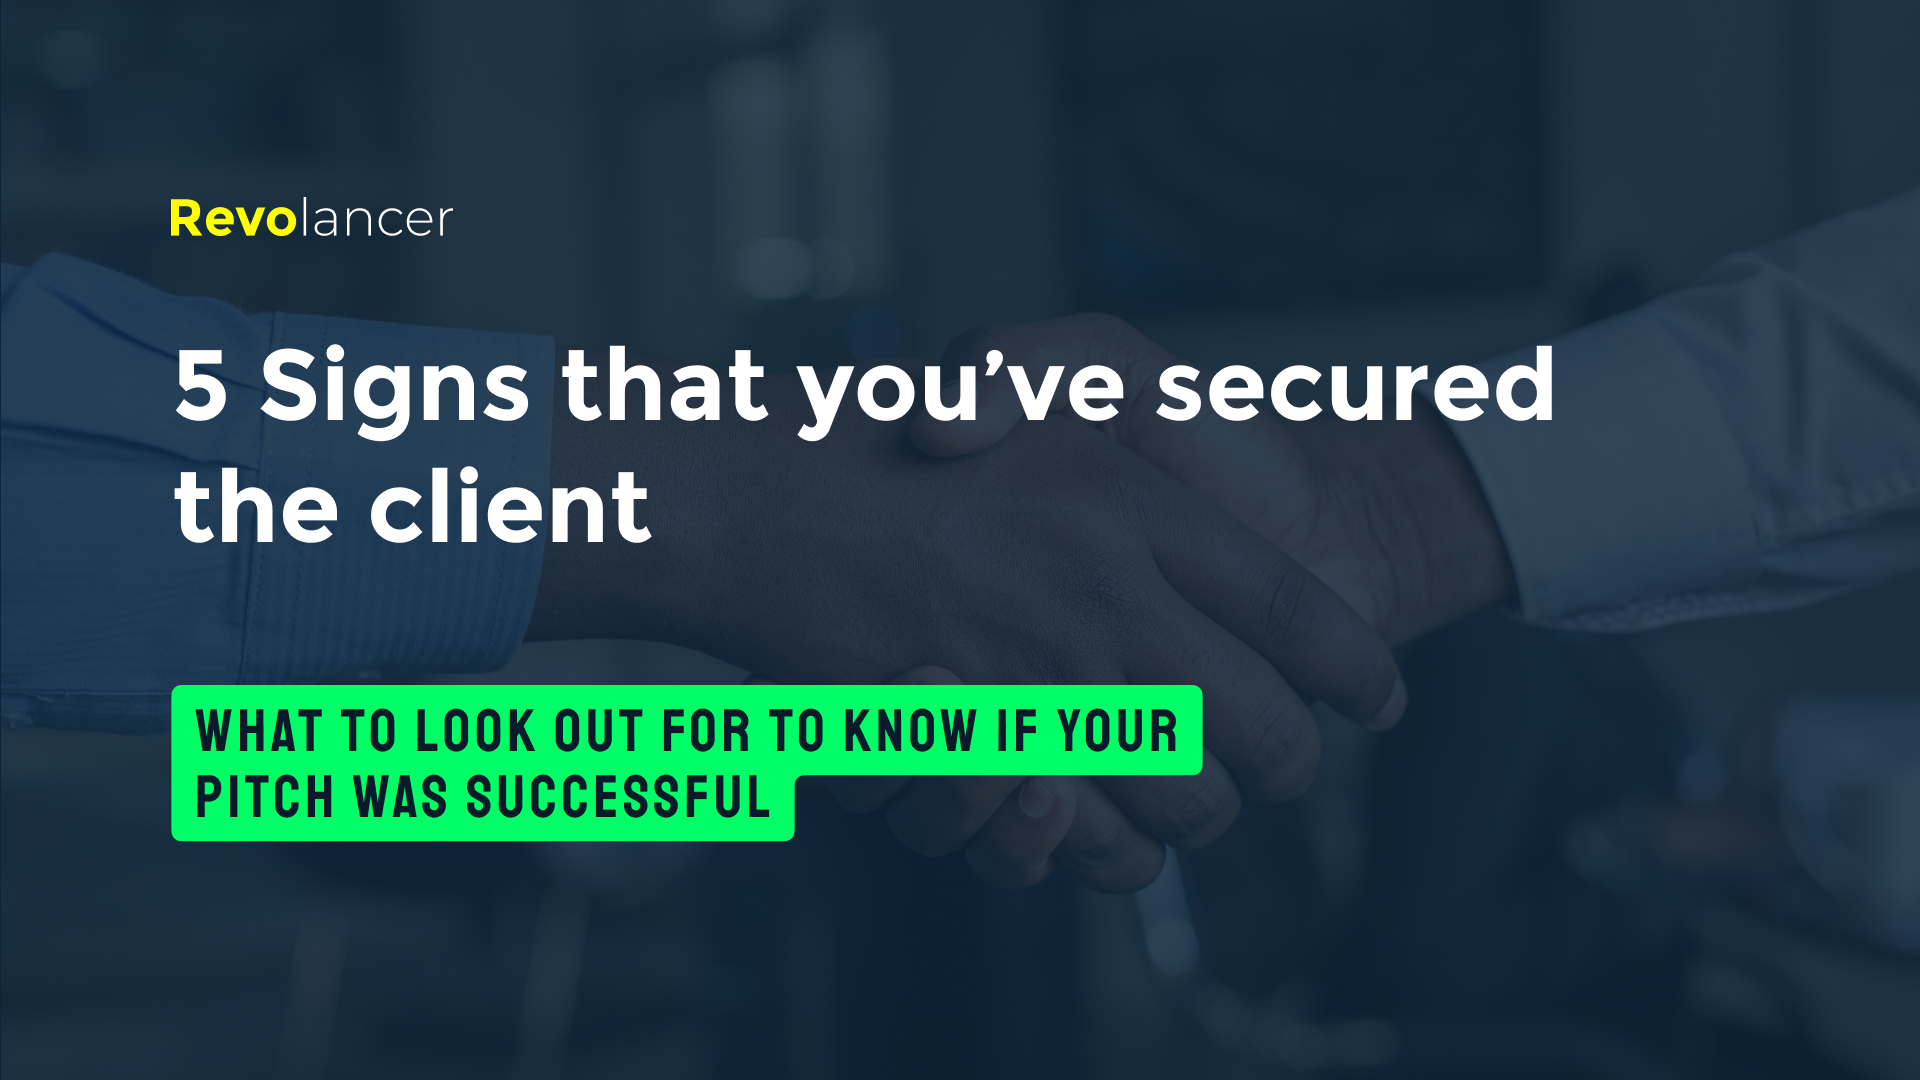 5 Signs that You’ve Secured the Client